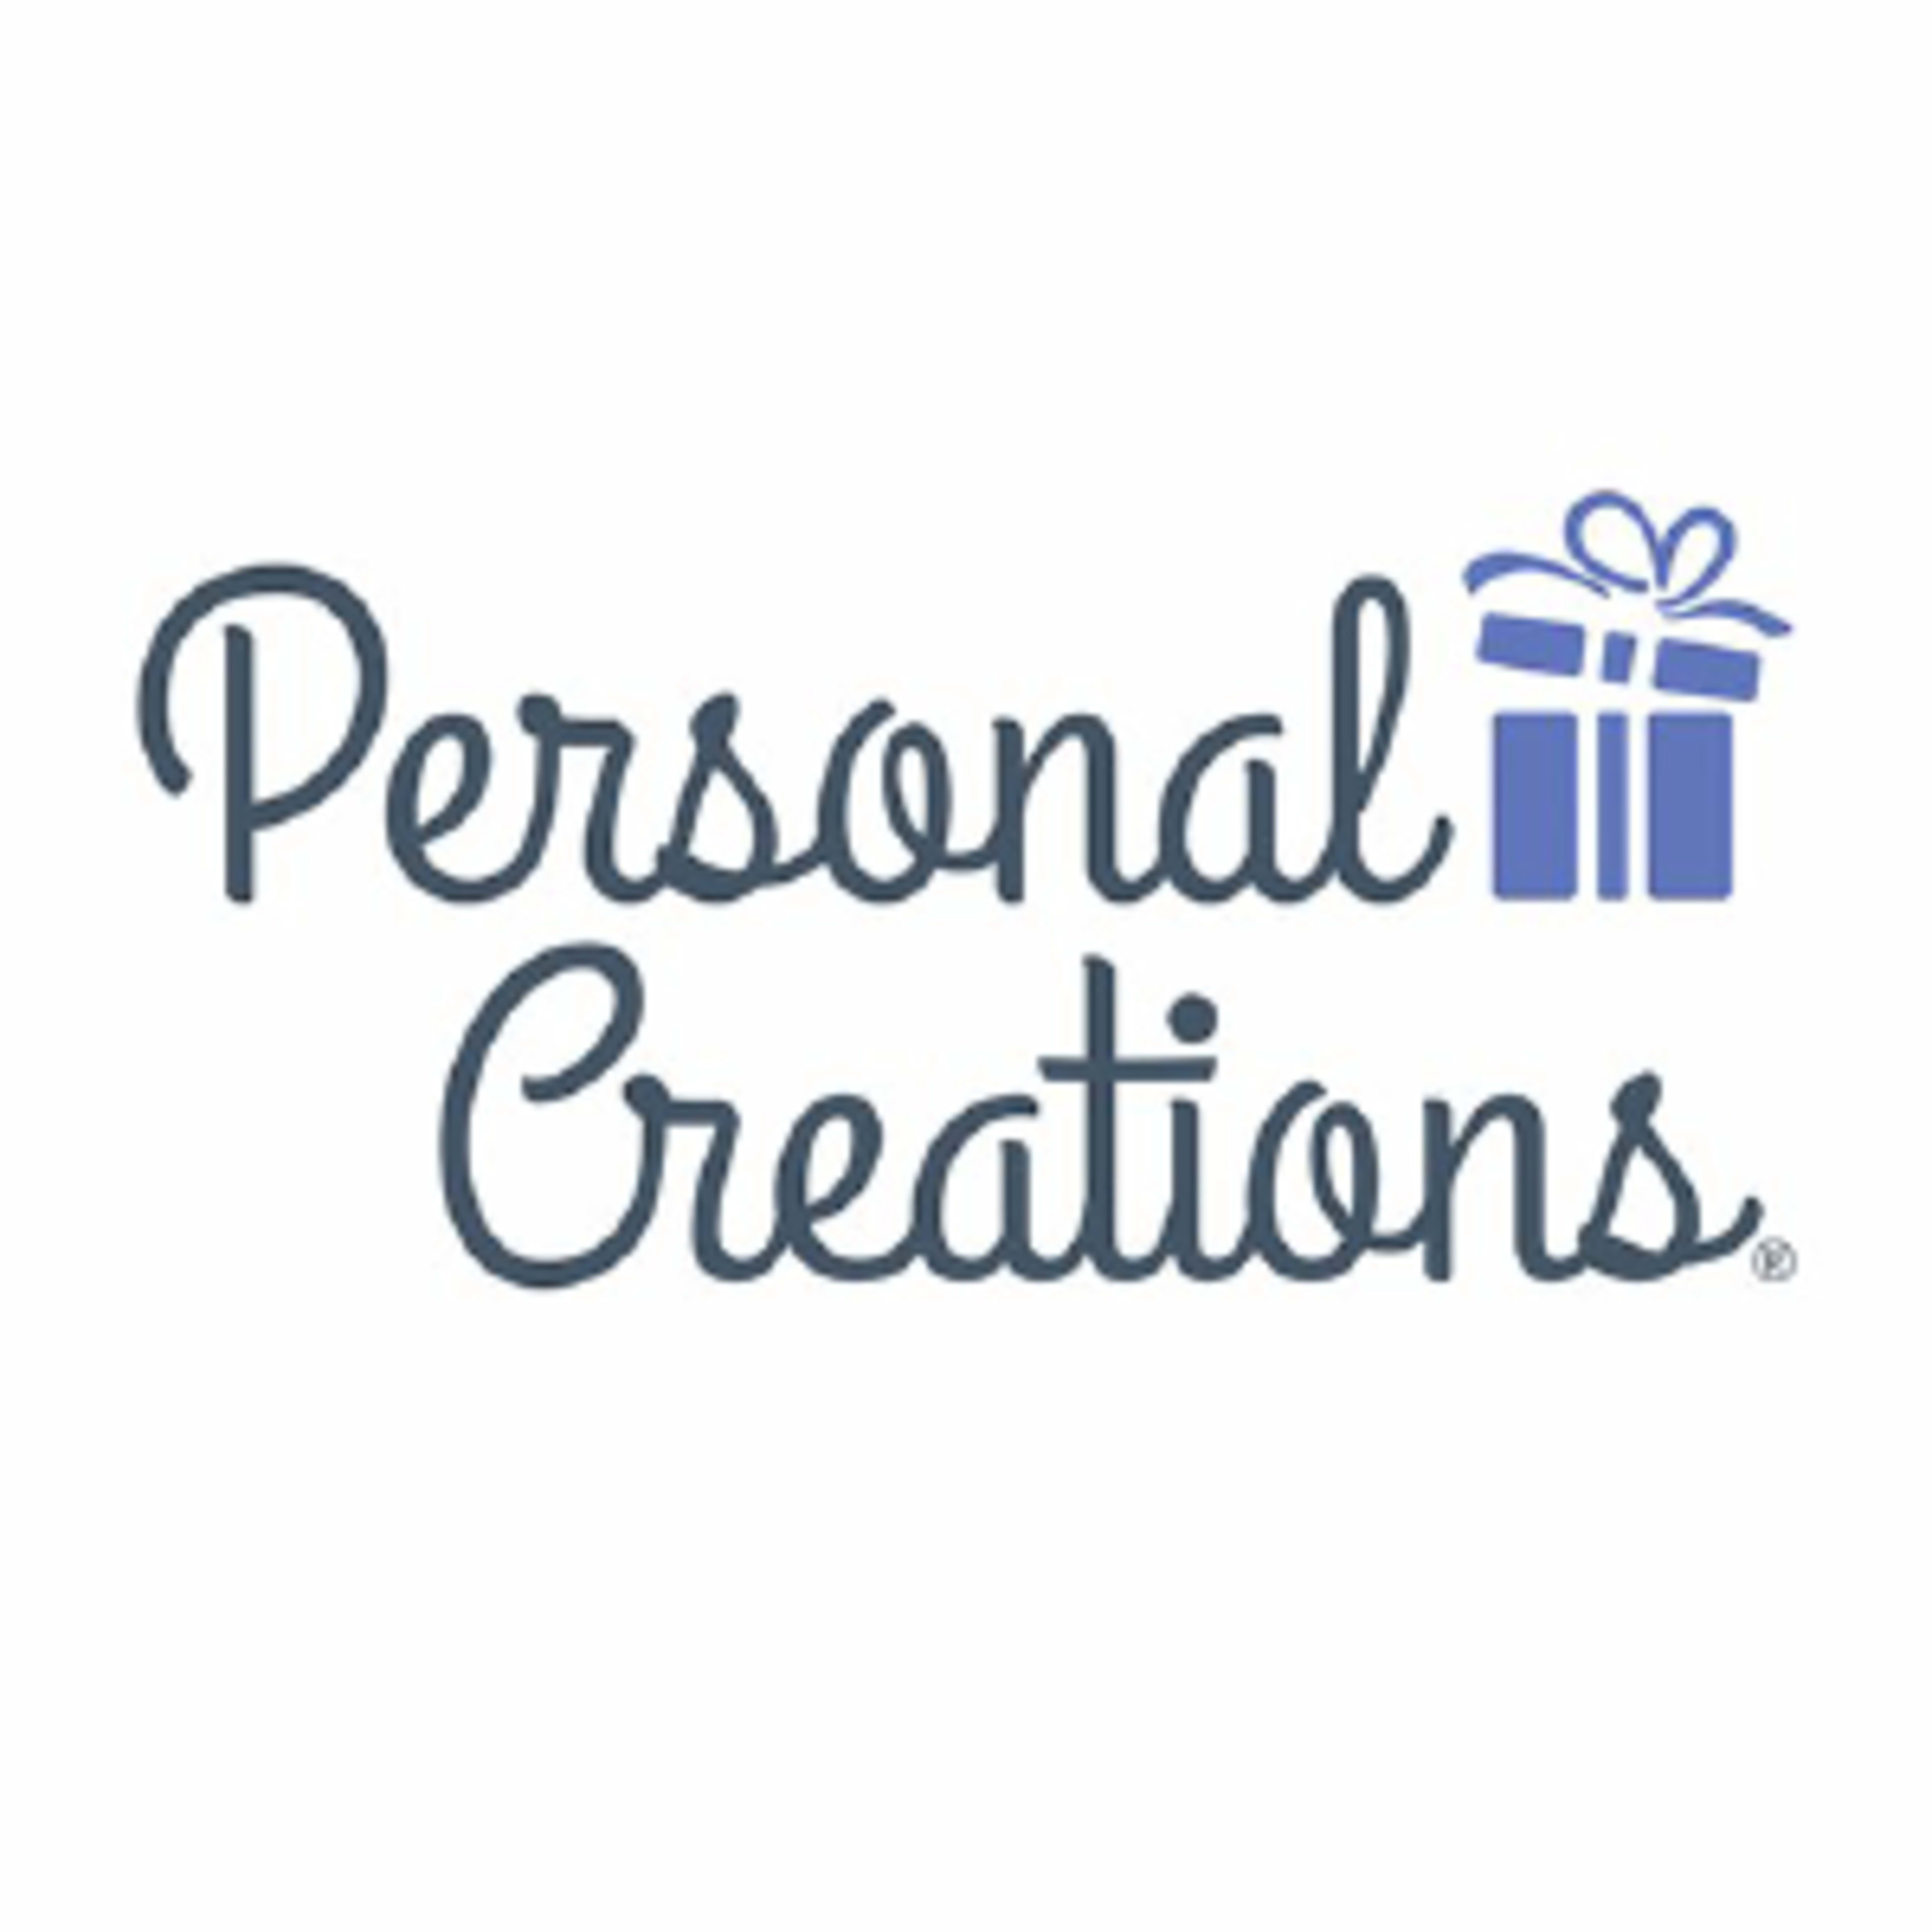 Personal CreationsCode